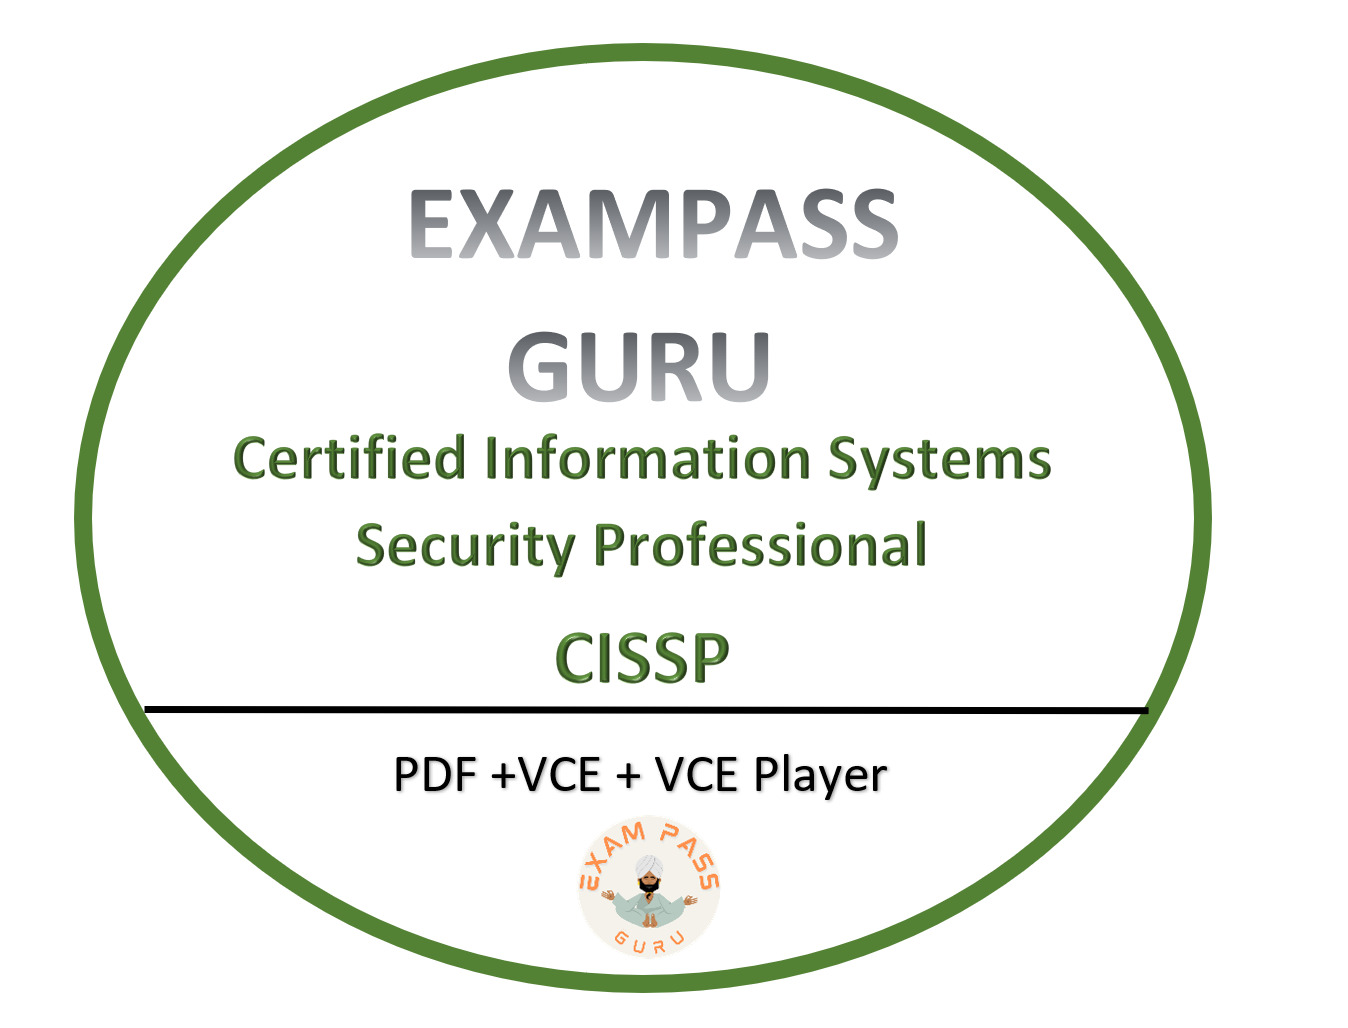 CISSP Certified Information Systems Security Professional MAY updates